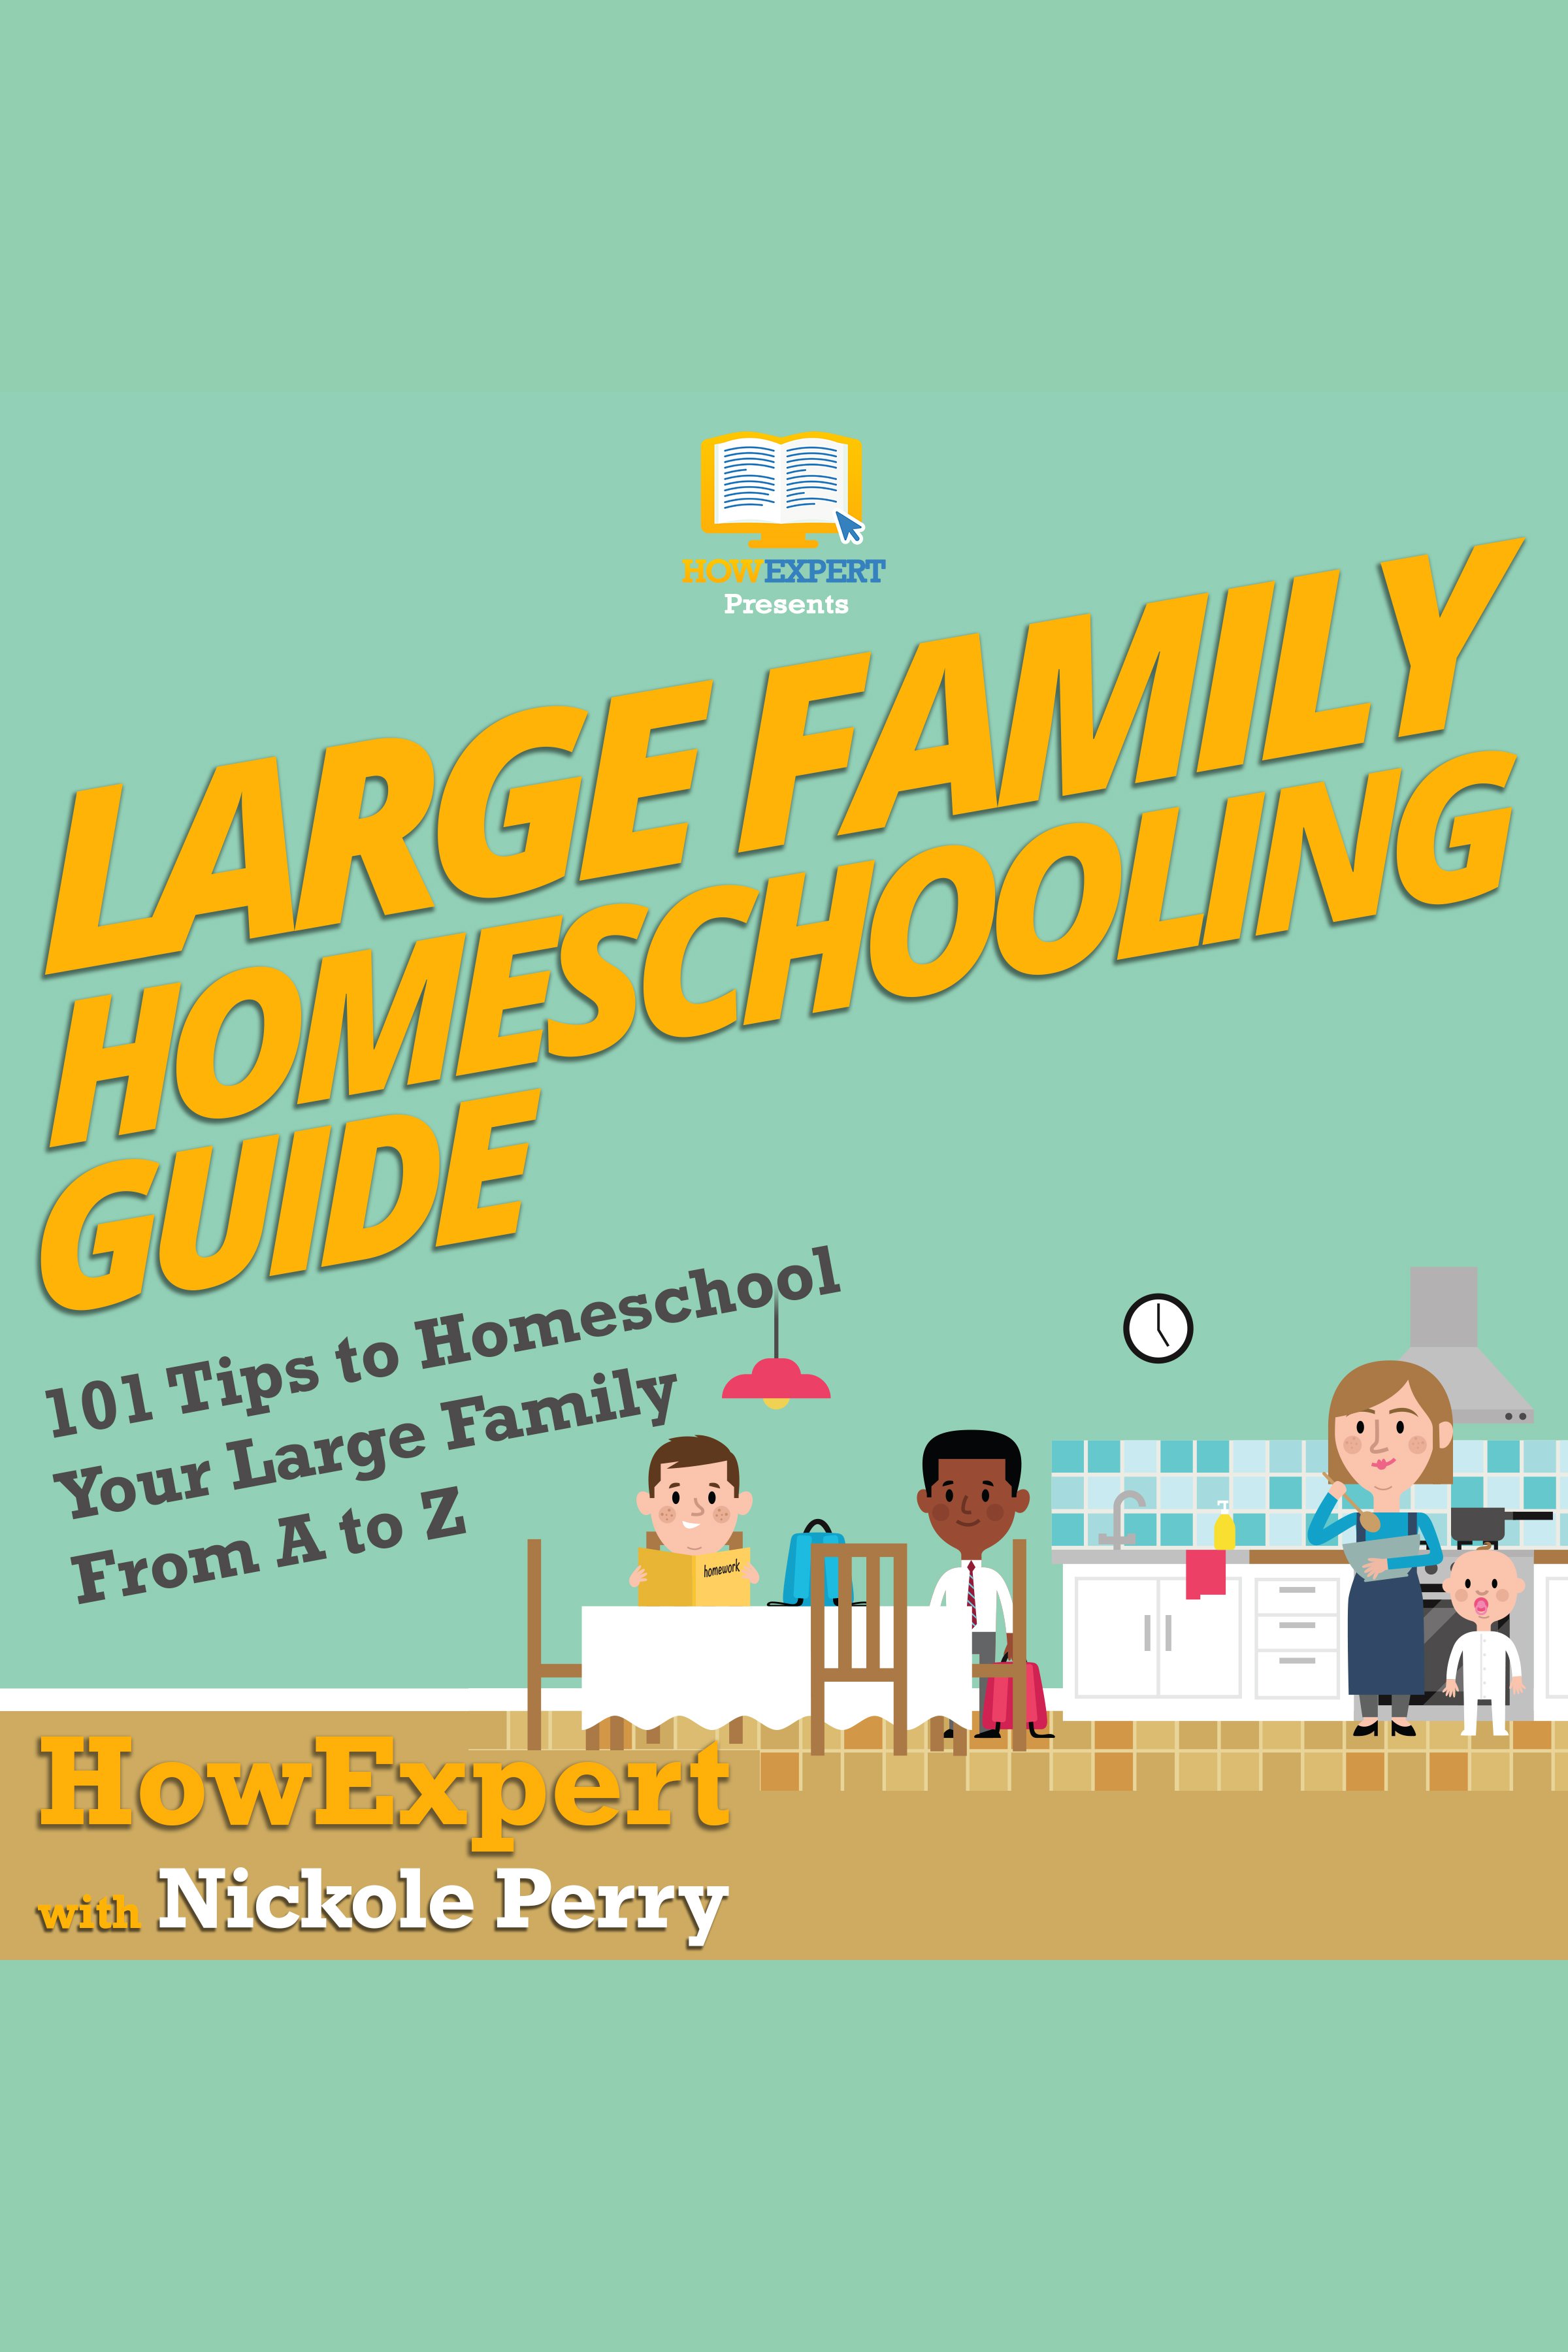 Large family homeschooling guide 101 tips to homeschool your large family from A to Z cover image